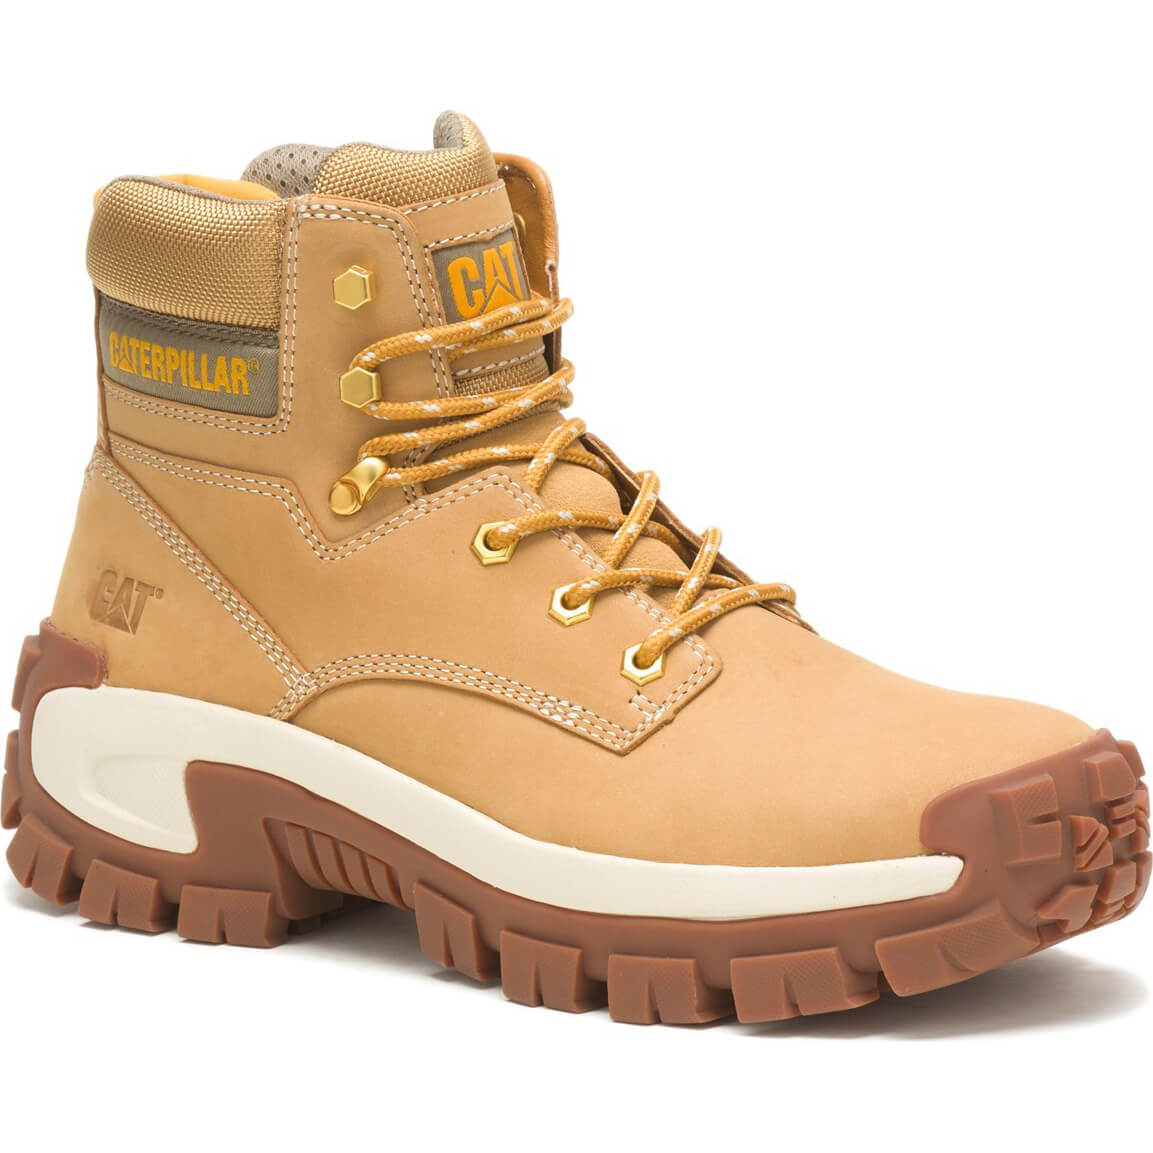 Image of Caterpillar Mens Invader Hiker Safety Boot Honey Size 9